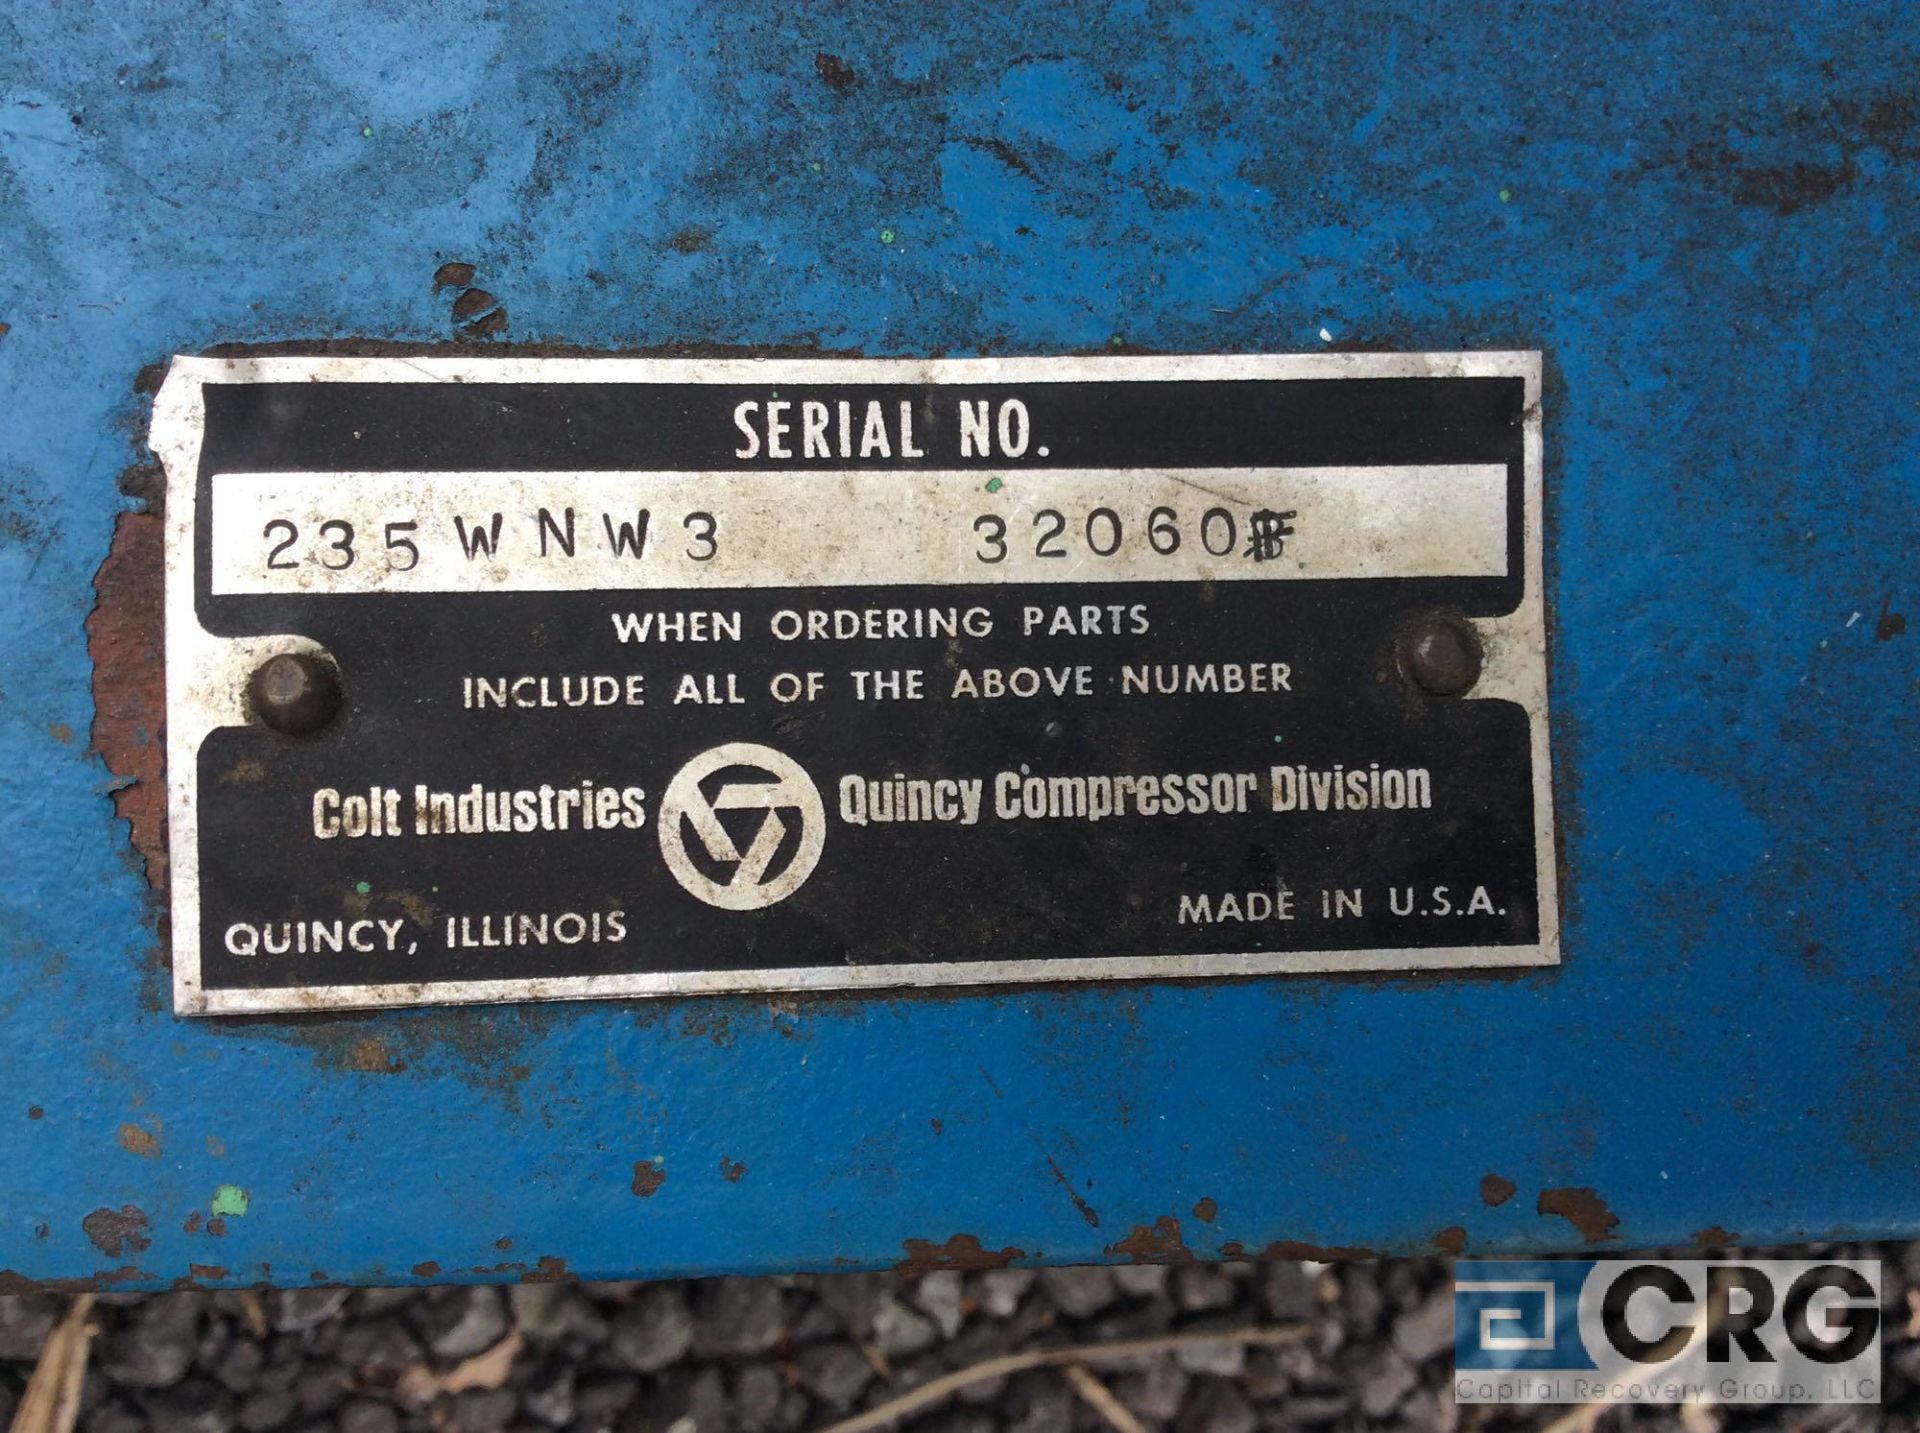 Quincy skid mount air compressor, 50 hp, mn Q235, sn 32060 (LOCATED HARRISON AVE) - Image 2 of 3